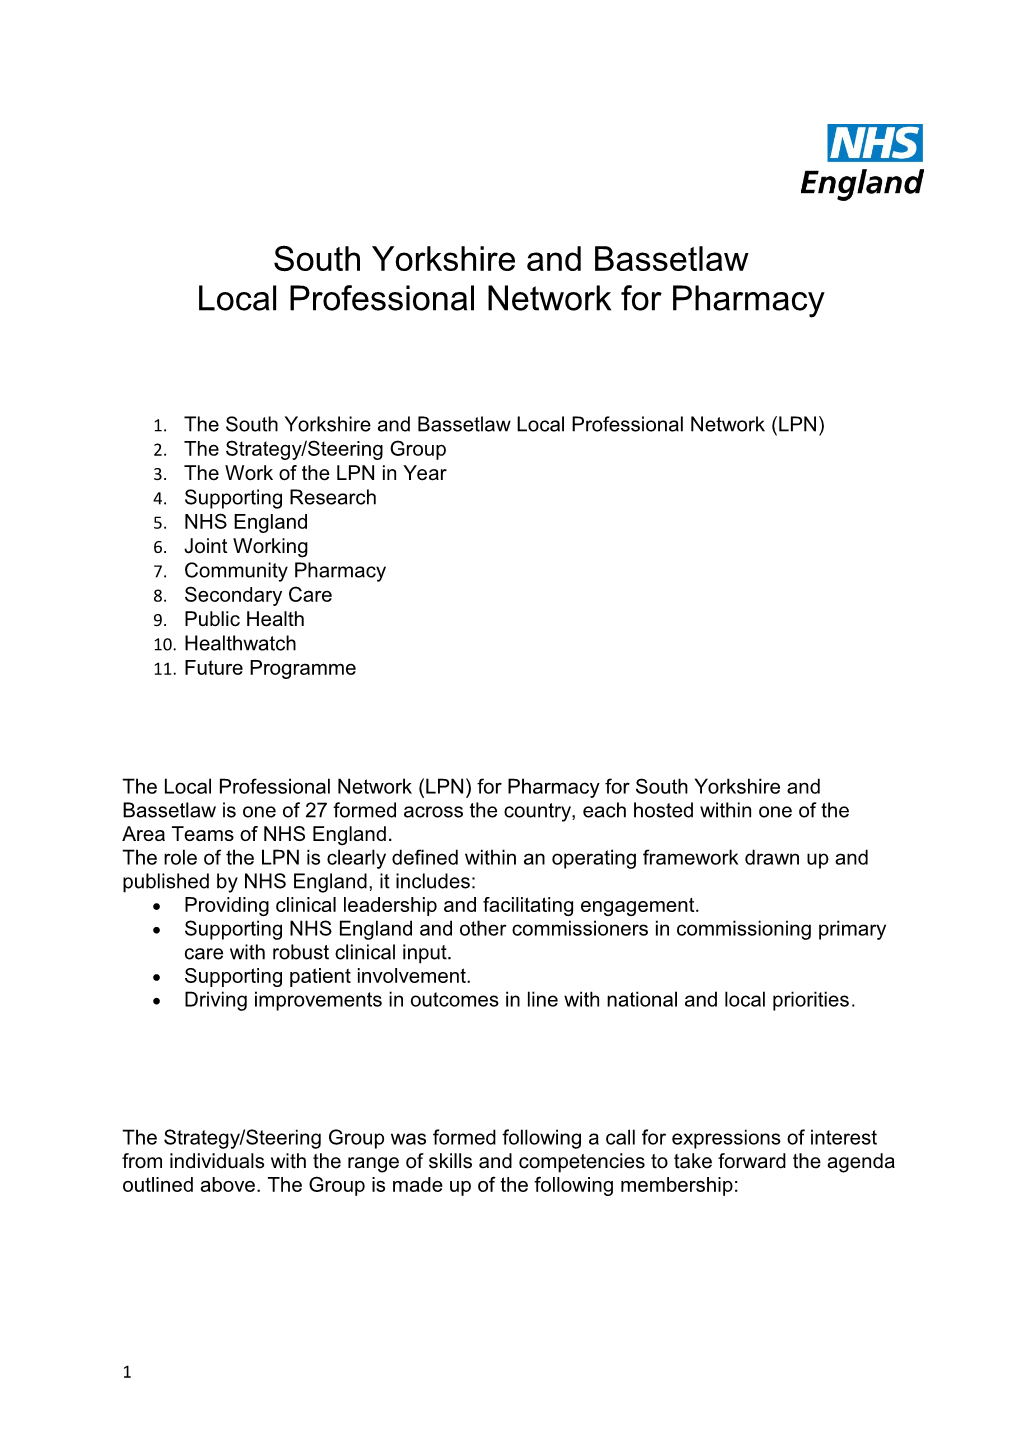 South Yorkshire and Bassetlaw